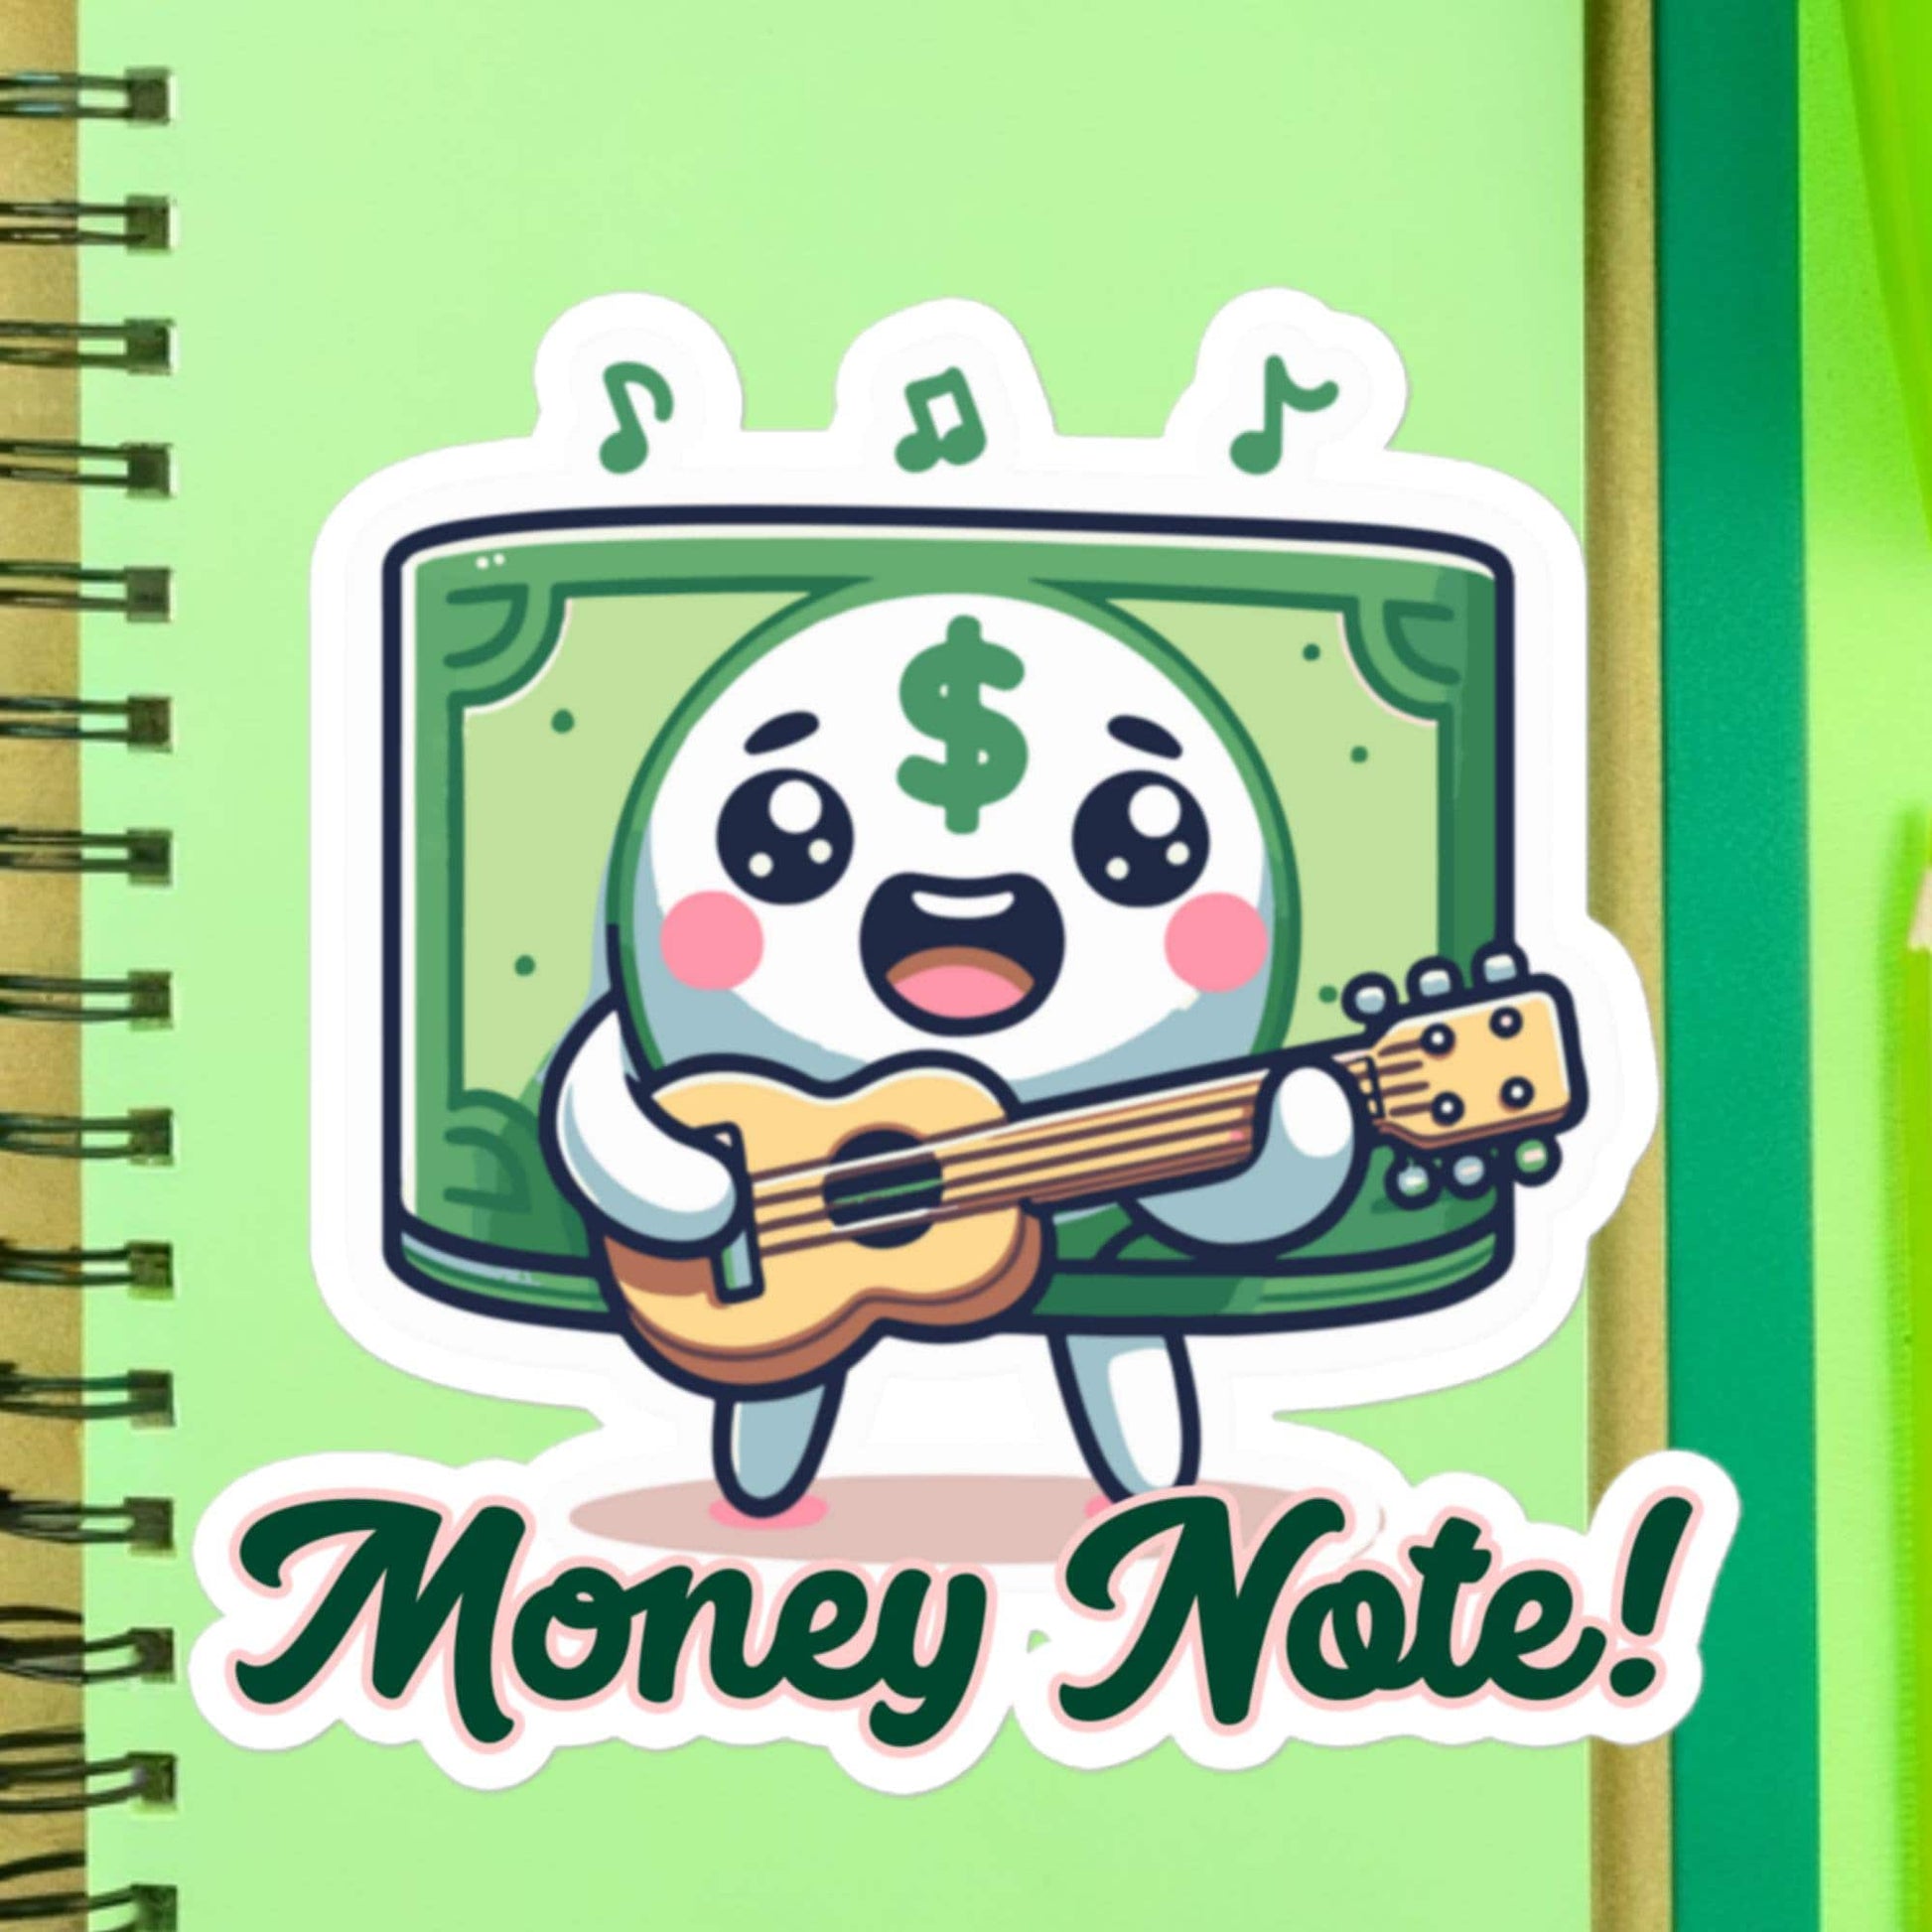 Money Note! Dollar Bill playing the guitar hits the money note! Fun musician stickersBubble-free stickers